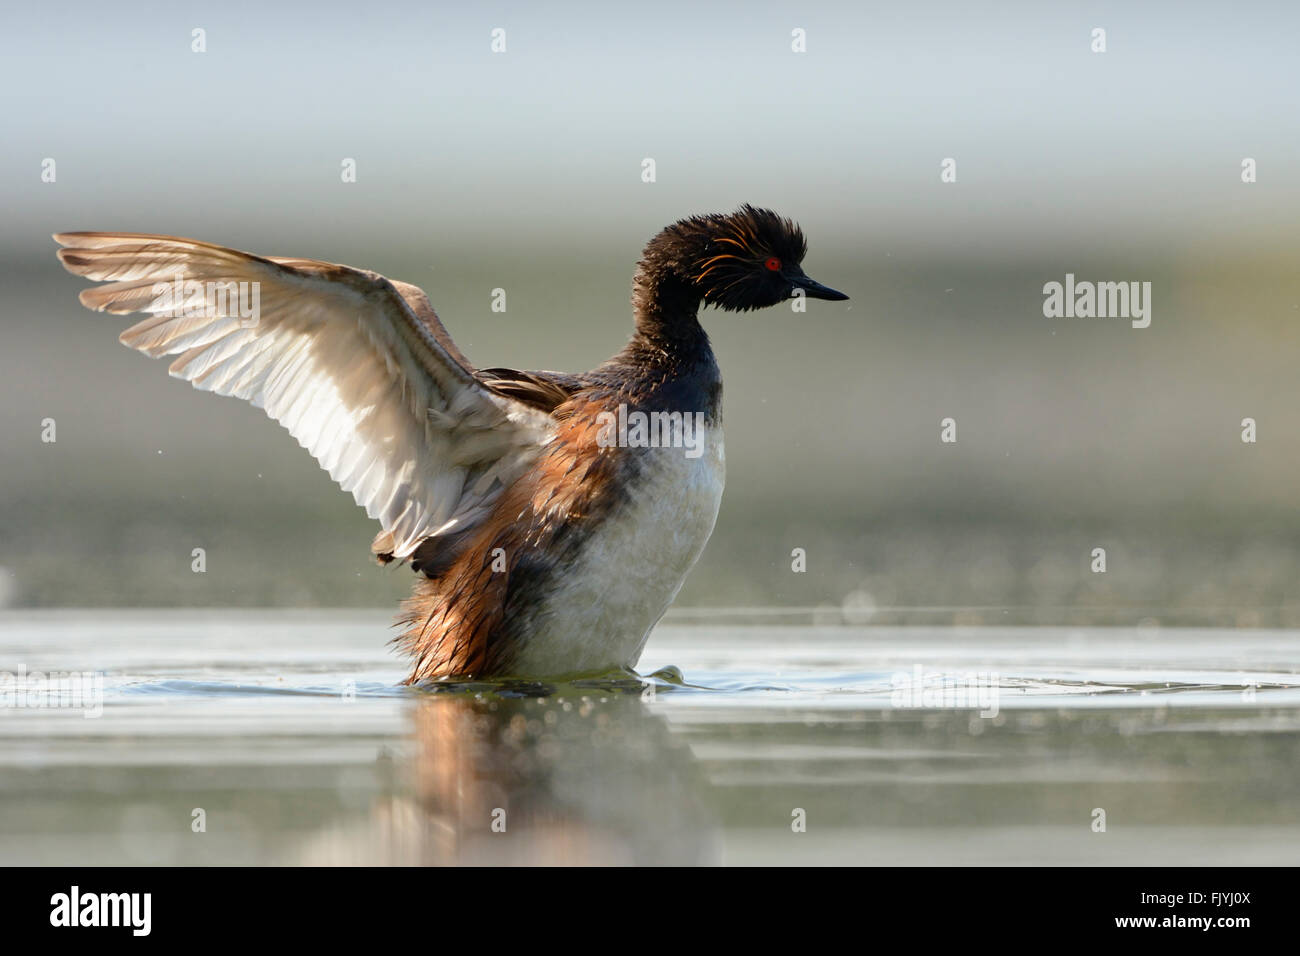 Black-necked Grebe / Eared Grebe ( Podiceps nigricollis ) rearing high up out of the water, beating its wings. Stock Photo